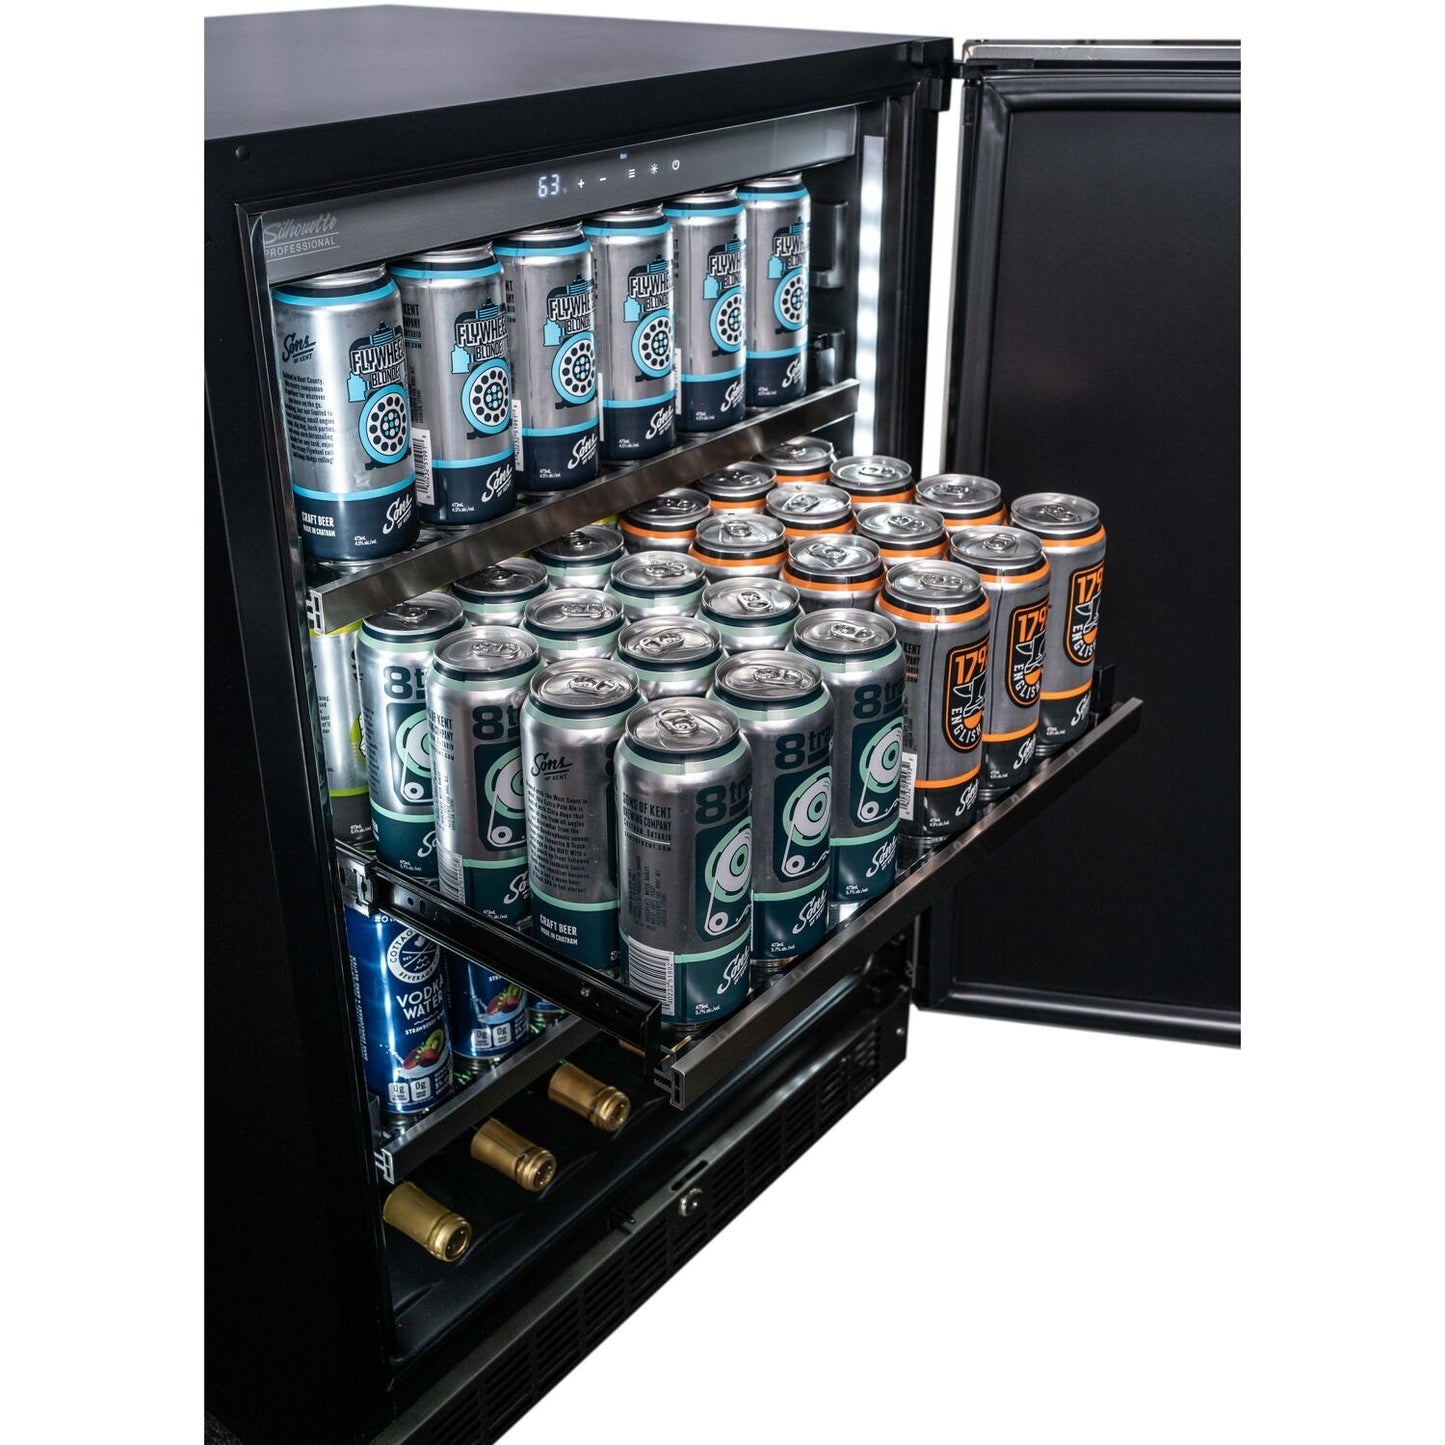 Danby Silhouette "Niagara" 24" Wide, Integrated All Refrigerator, Energy Star Rated- Holds 126 Cans